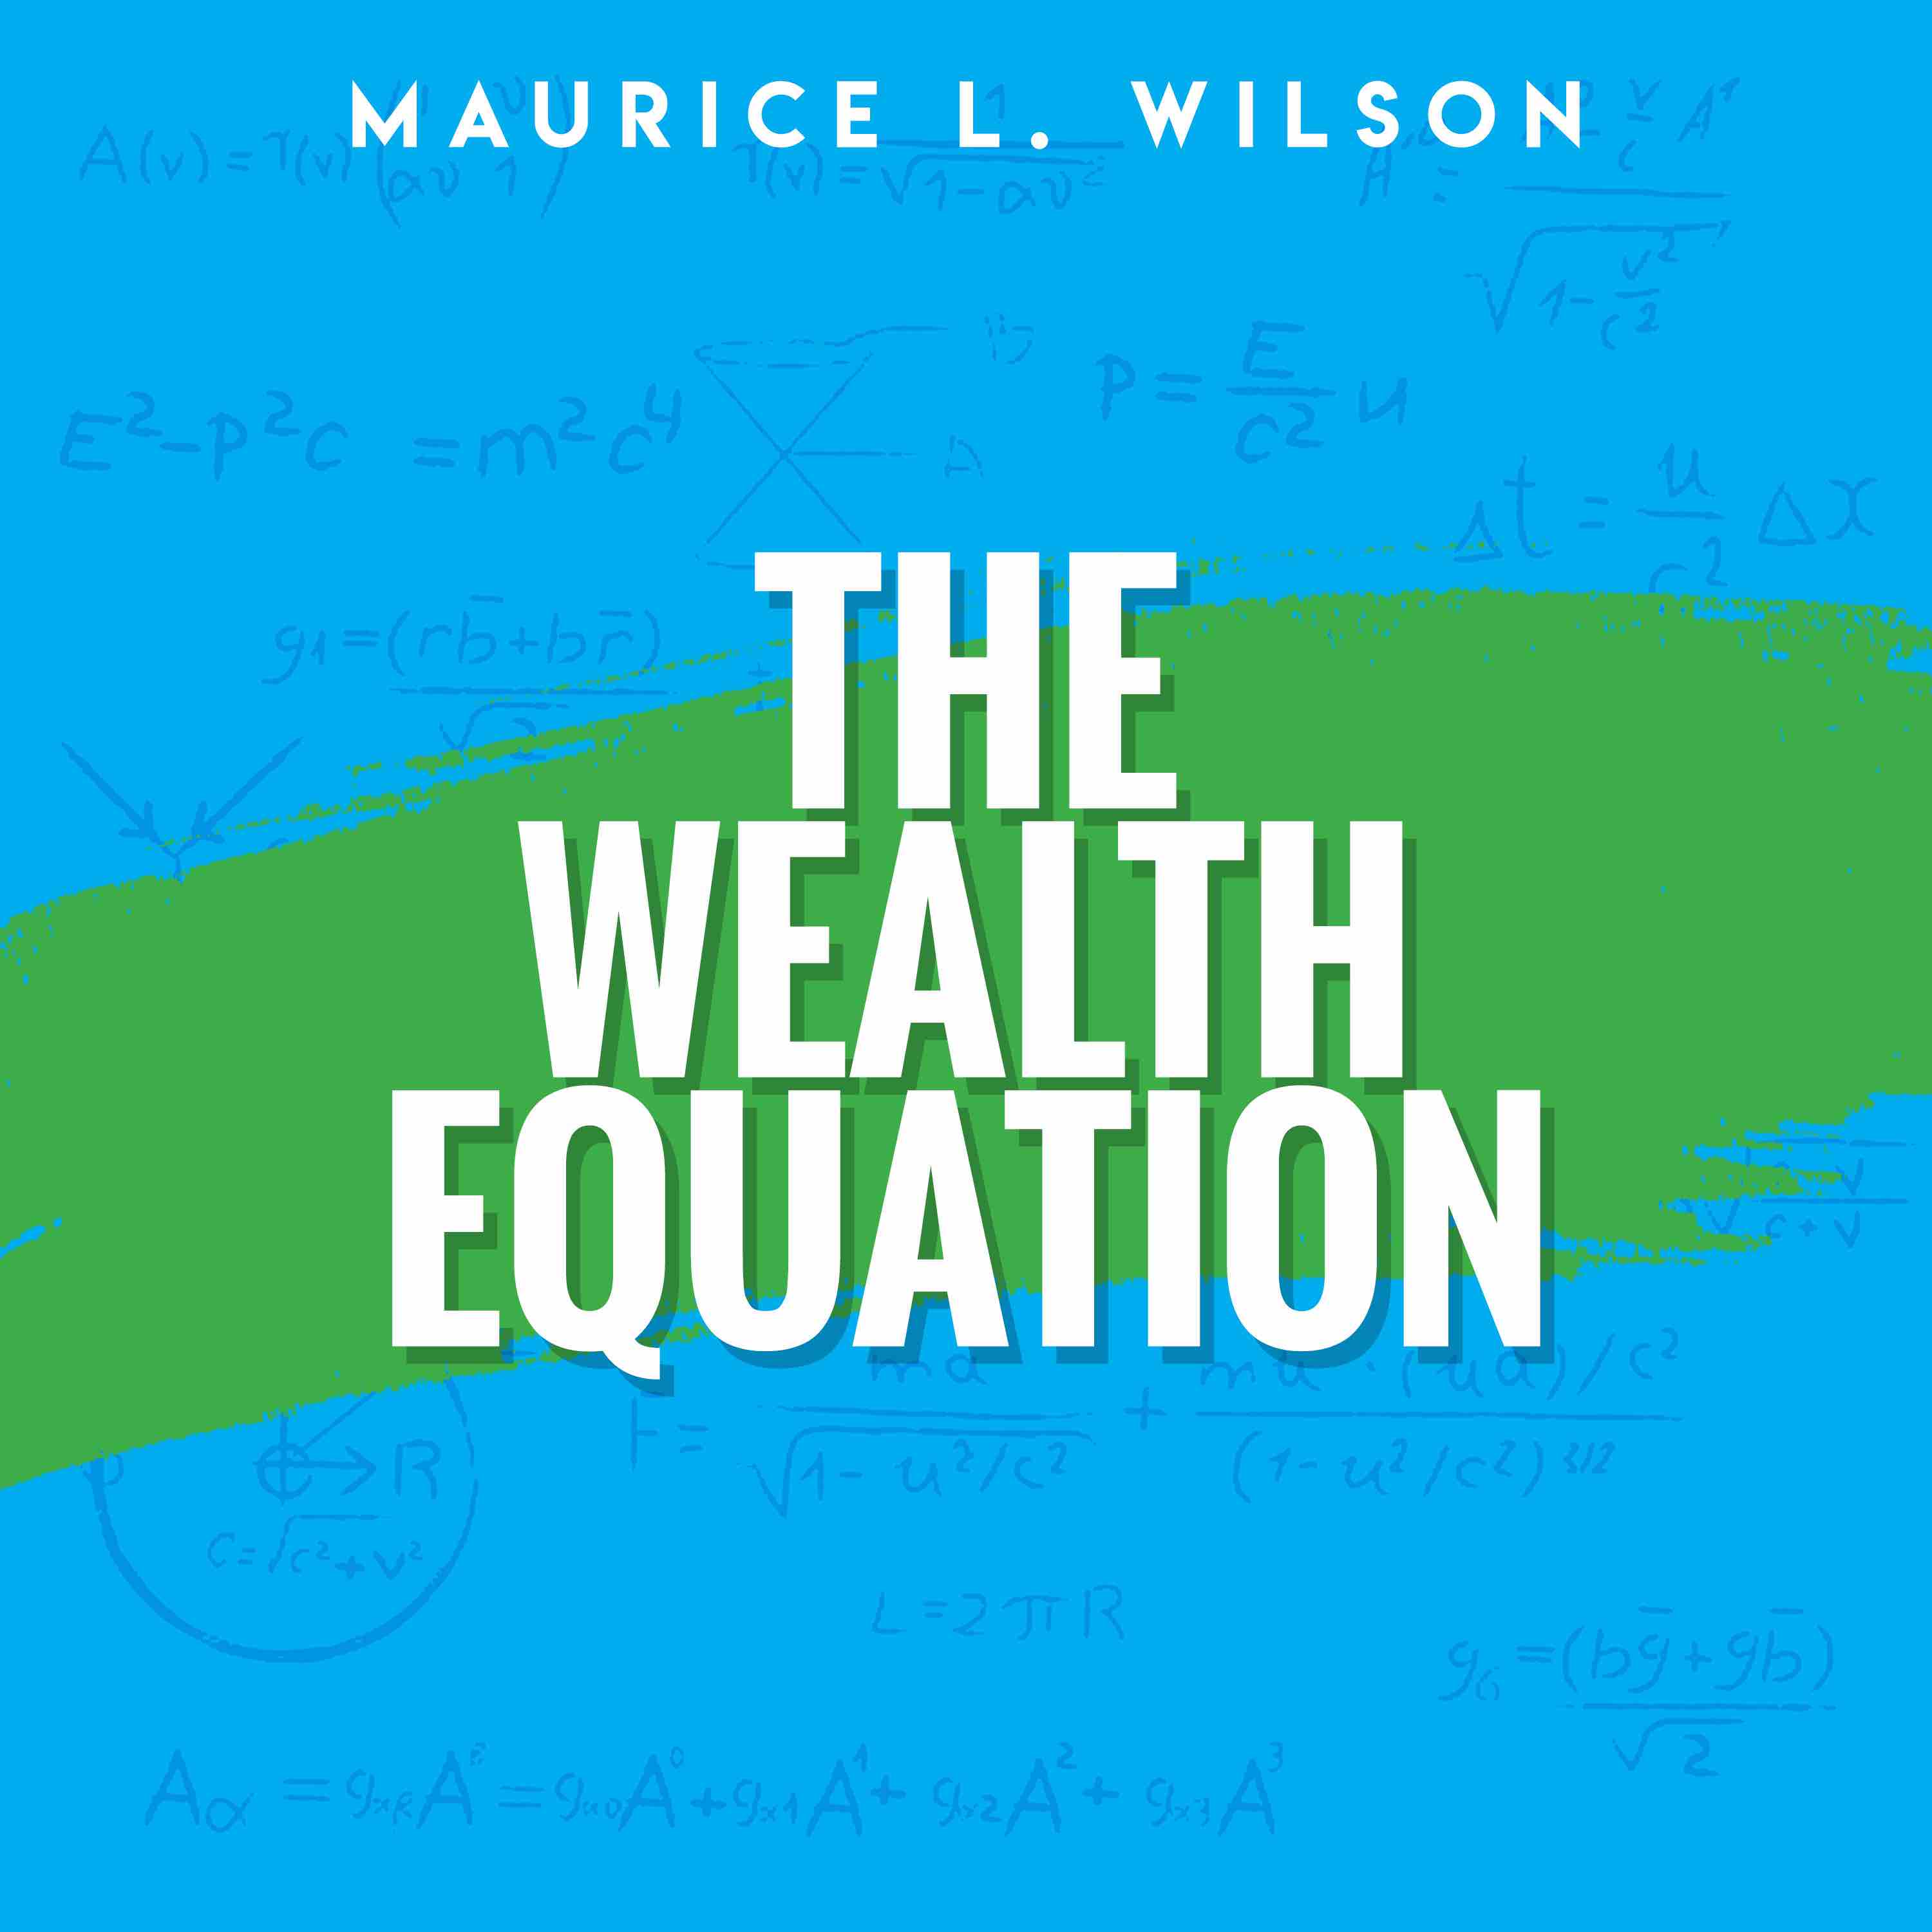 The Wealth Equation